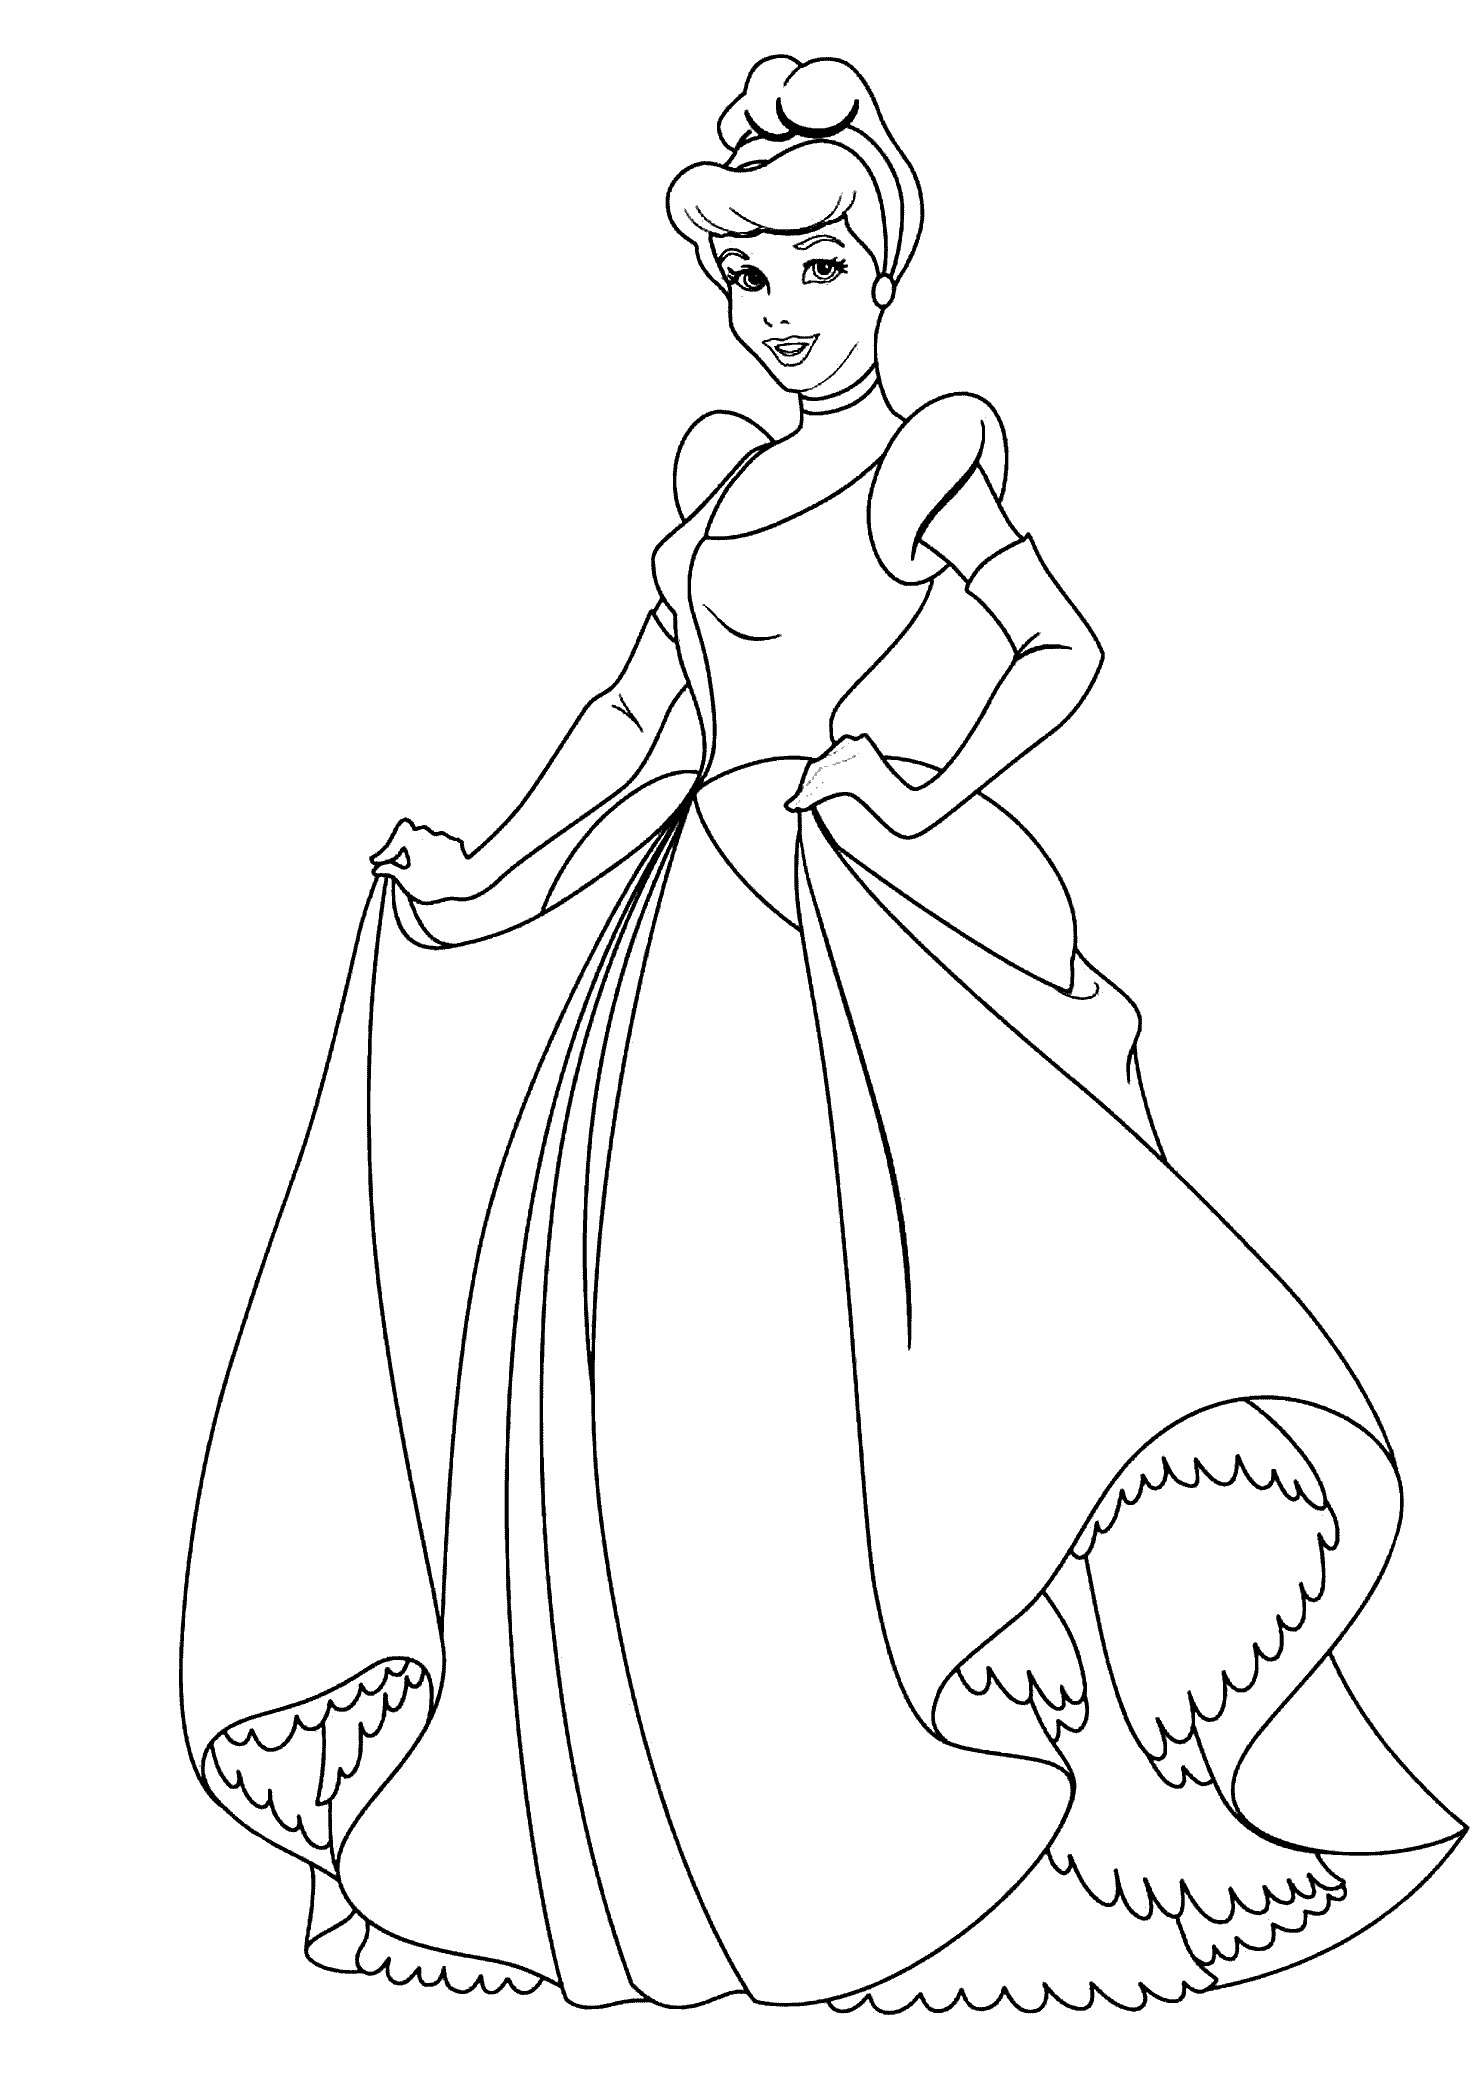 Disney Princess Coloring Pages For Kids
 Cinderella princess coloring pages for kids printable